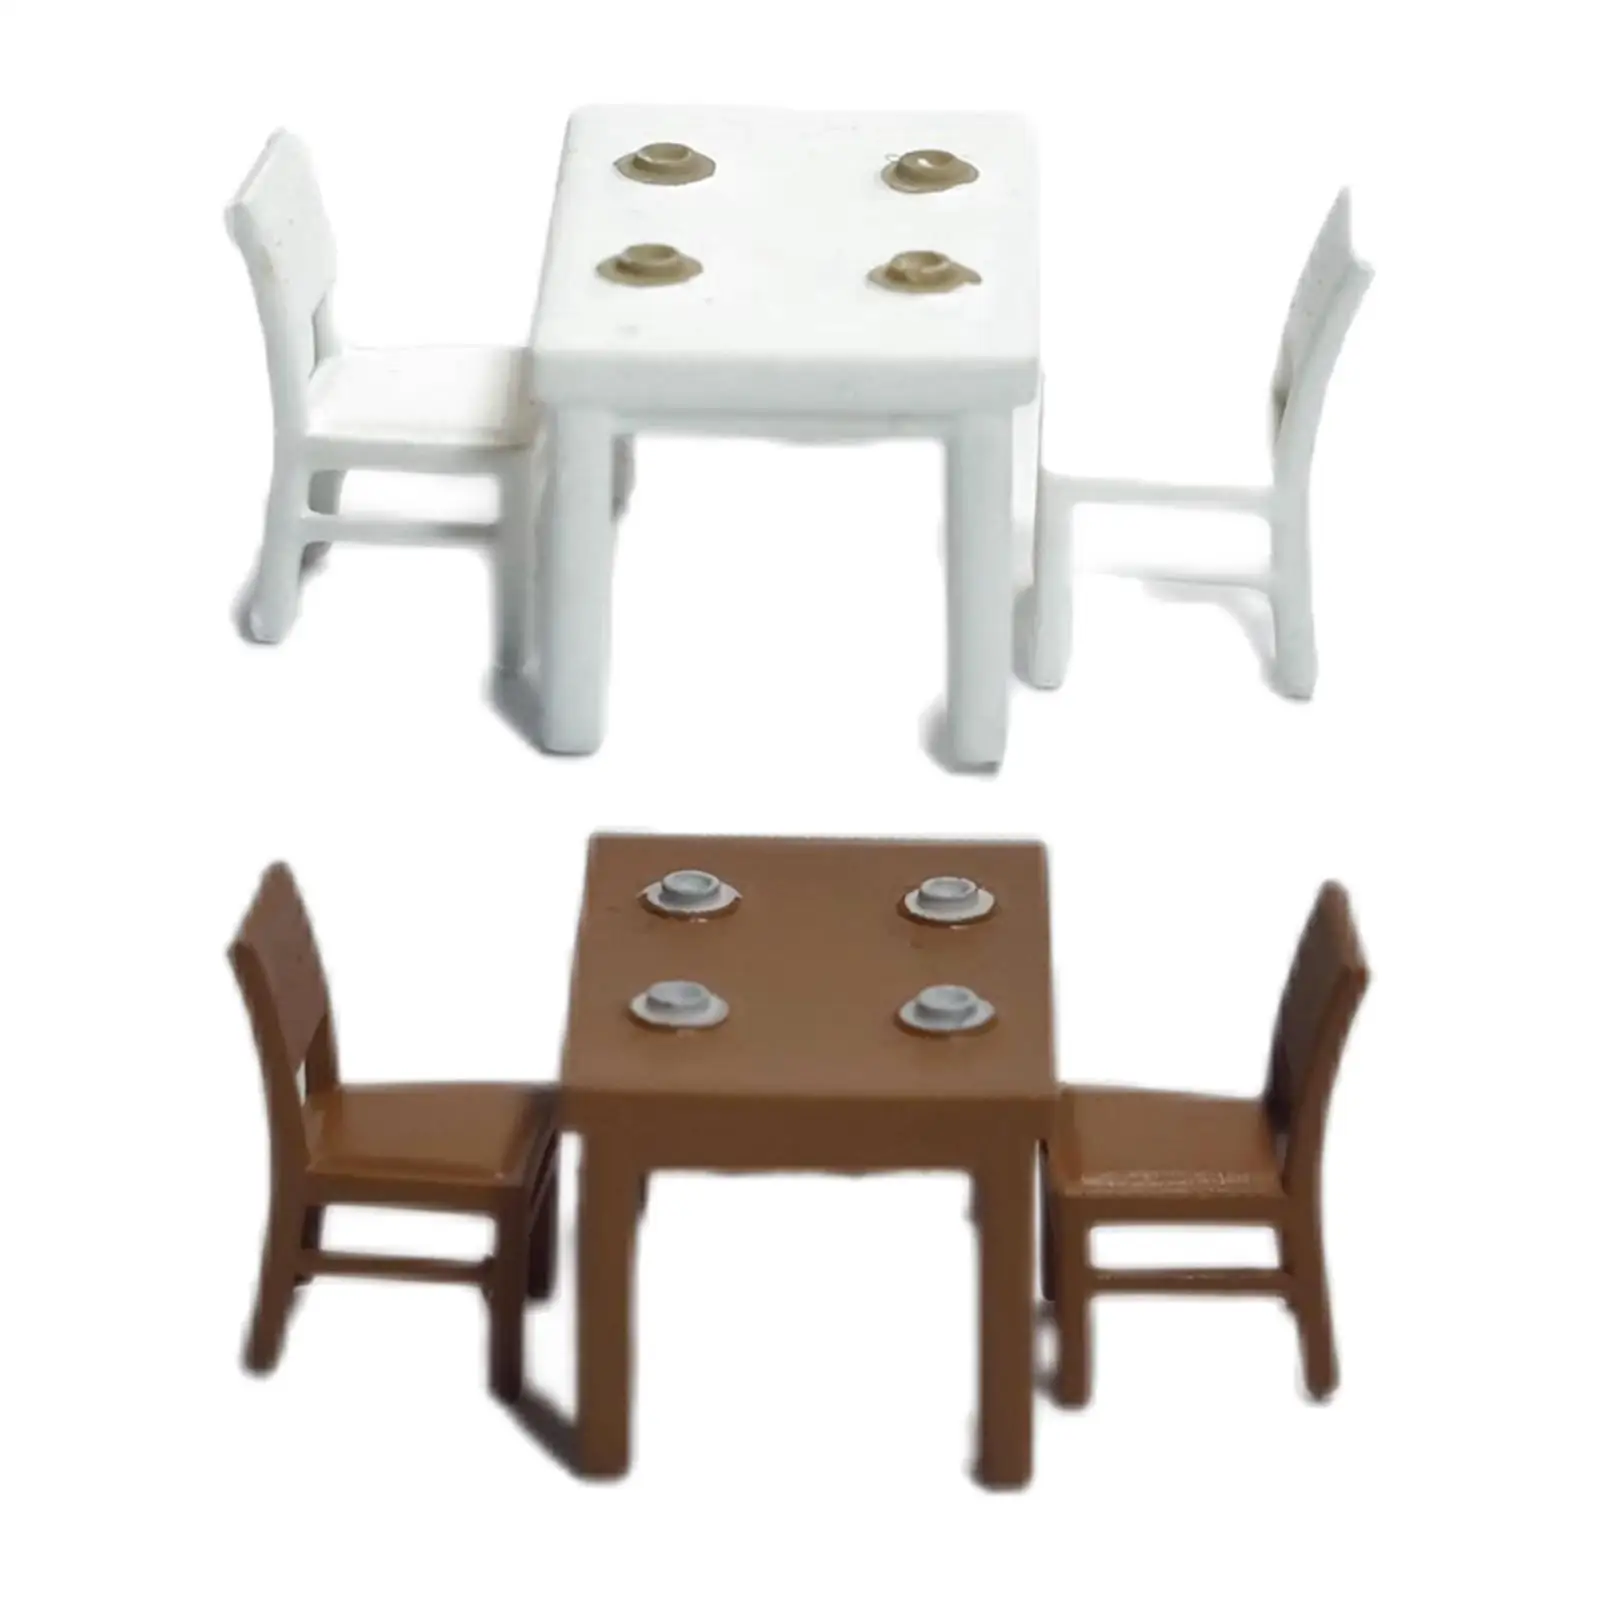 3 Pieces 1:64 Furniture Model Trains Architectural Photo Props Collections Fairy Garden Layout Table and Chair Diorama Scenery